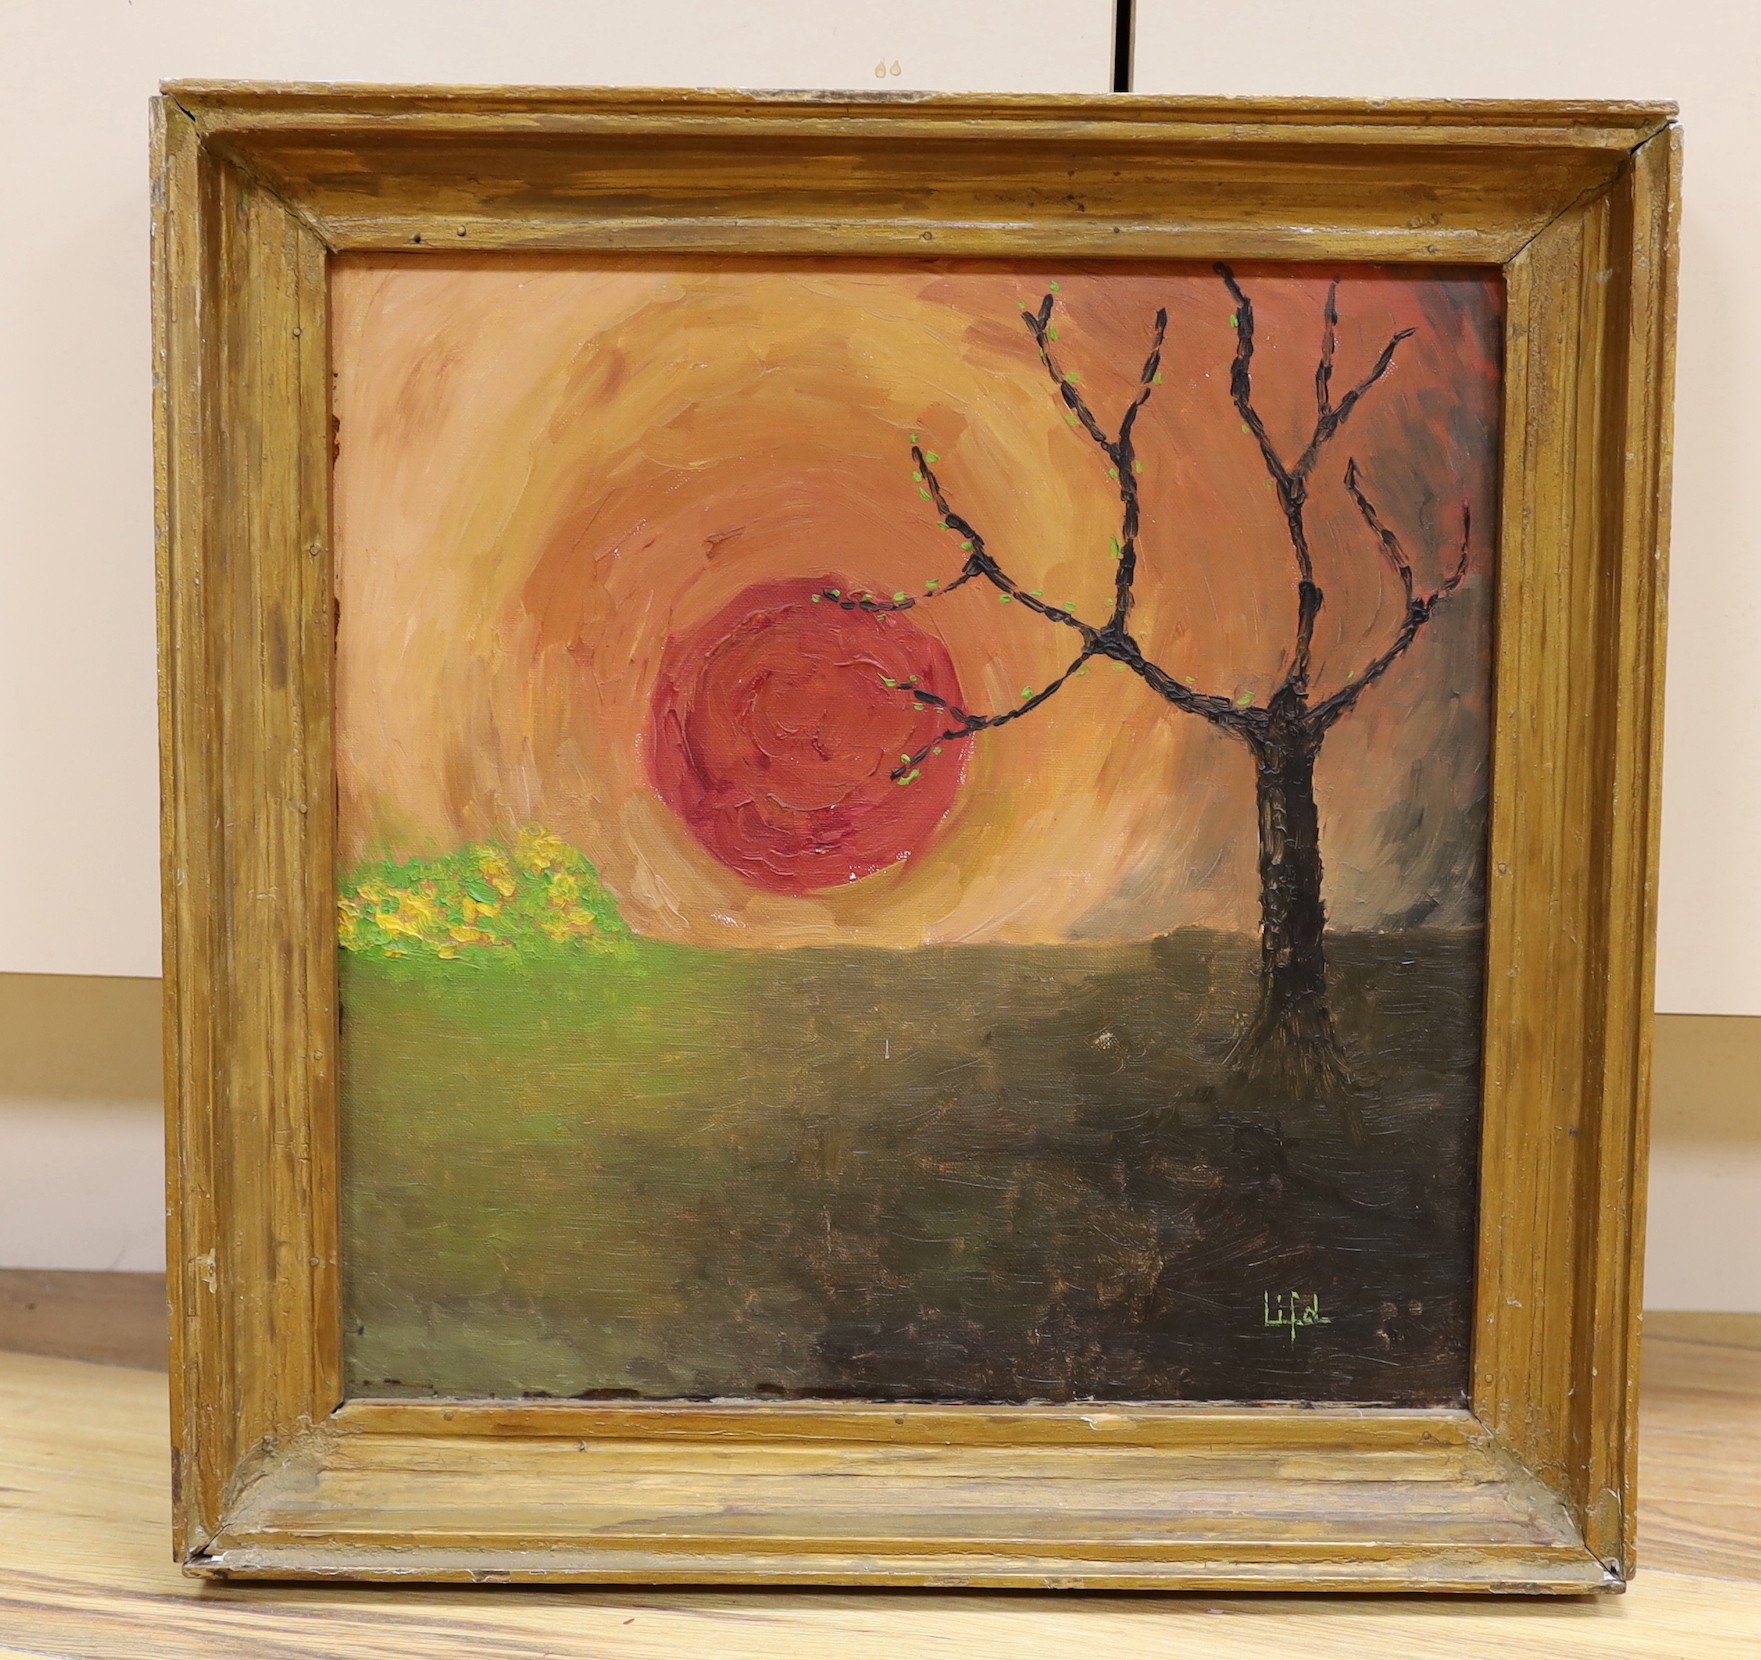 Lifd, oil on canvas, 'Sunset', signed, 34 x 34cm